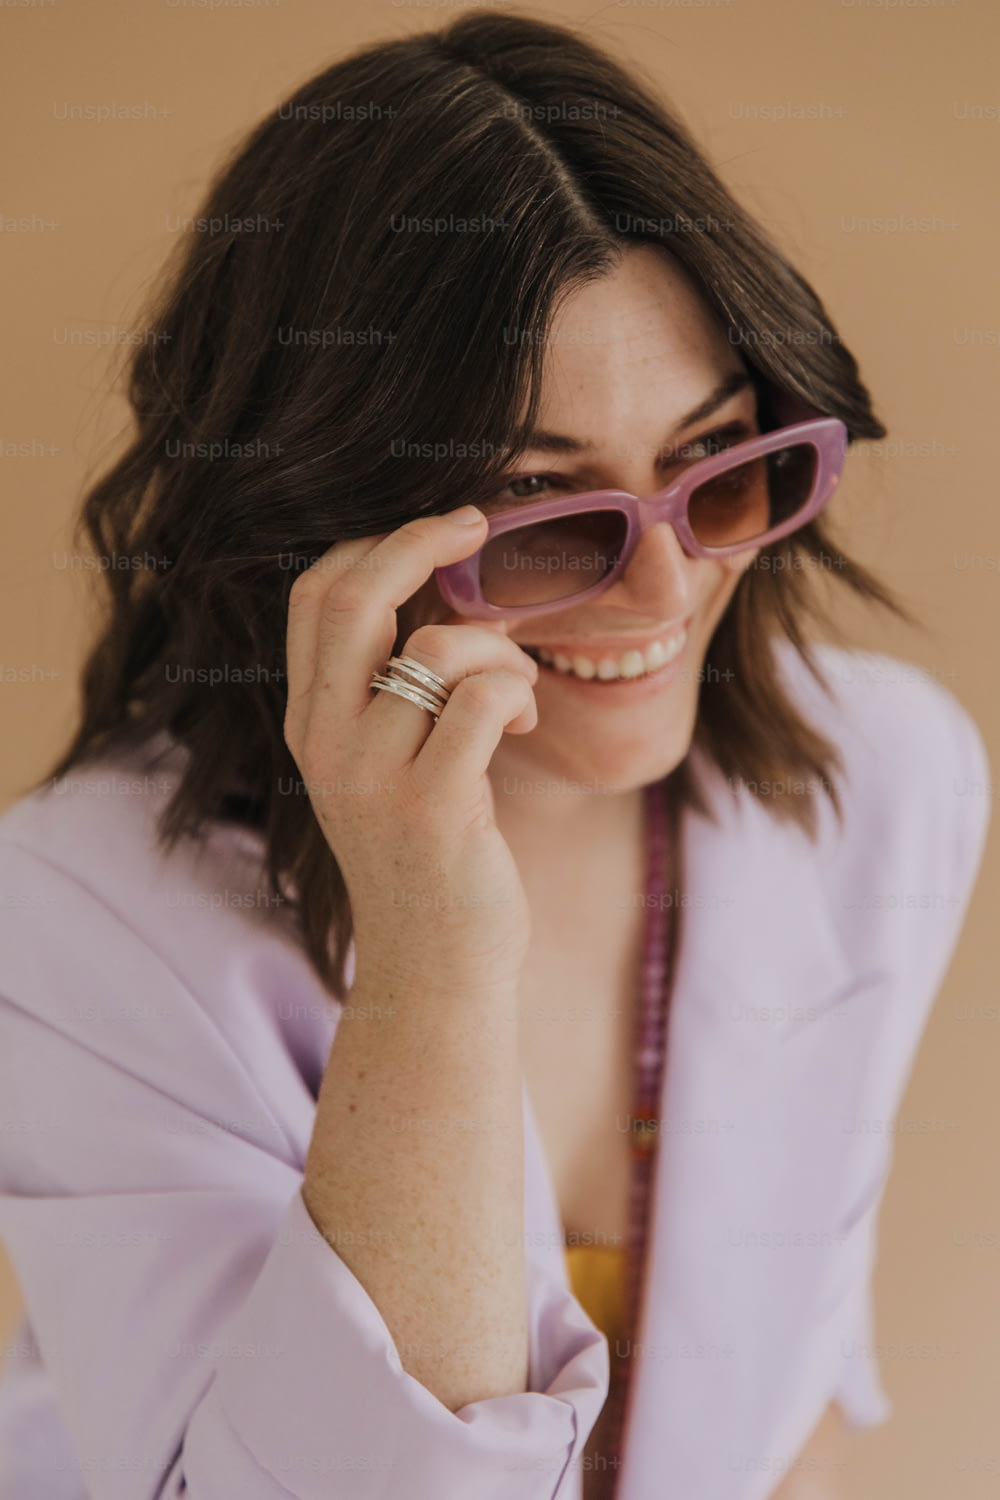 a woman in a purple shirt holding a pair of sunglasses